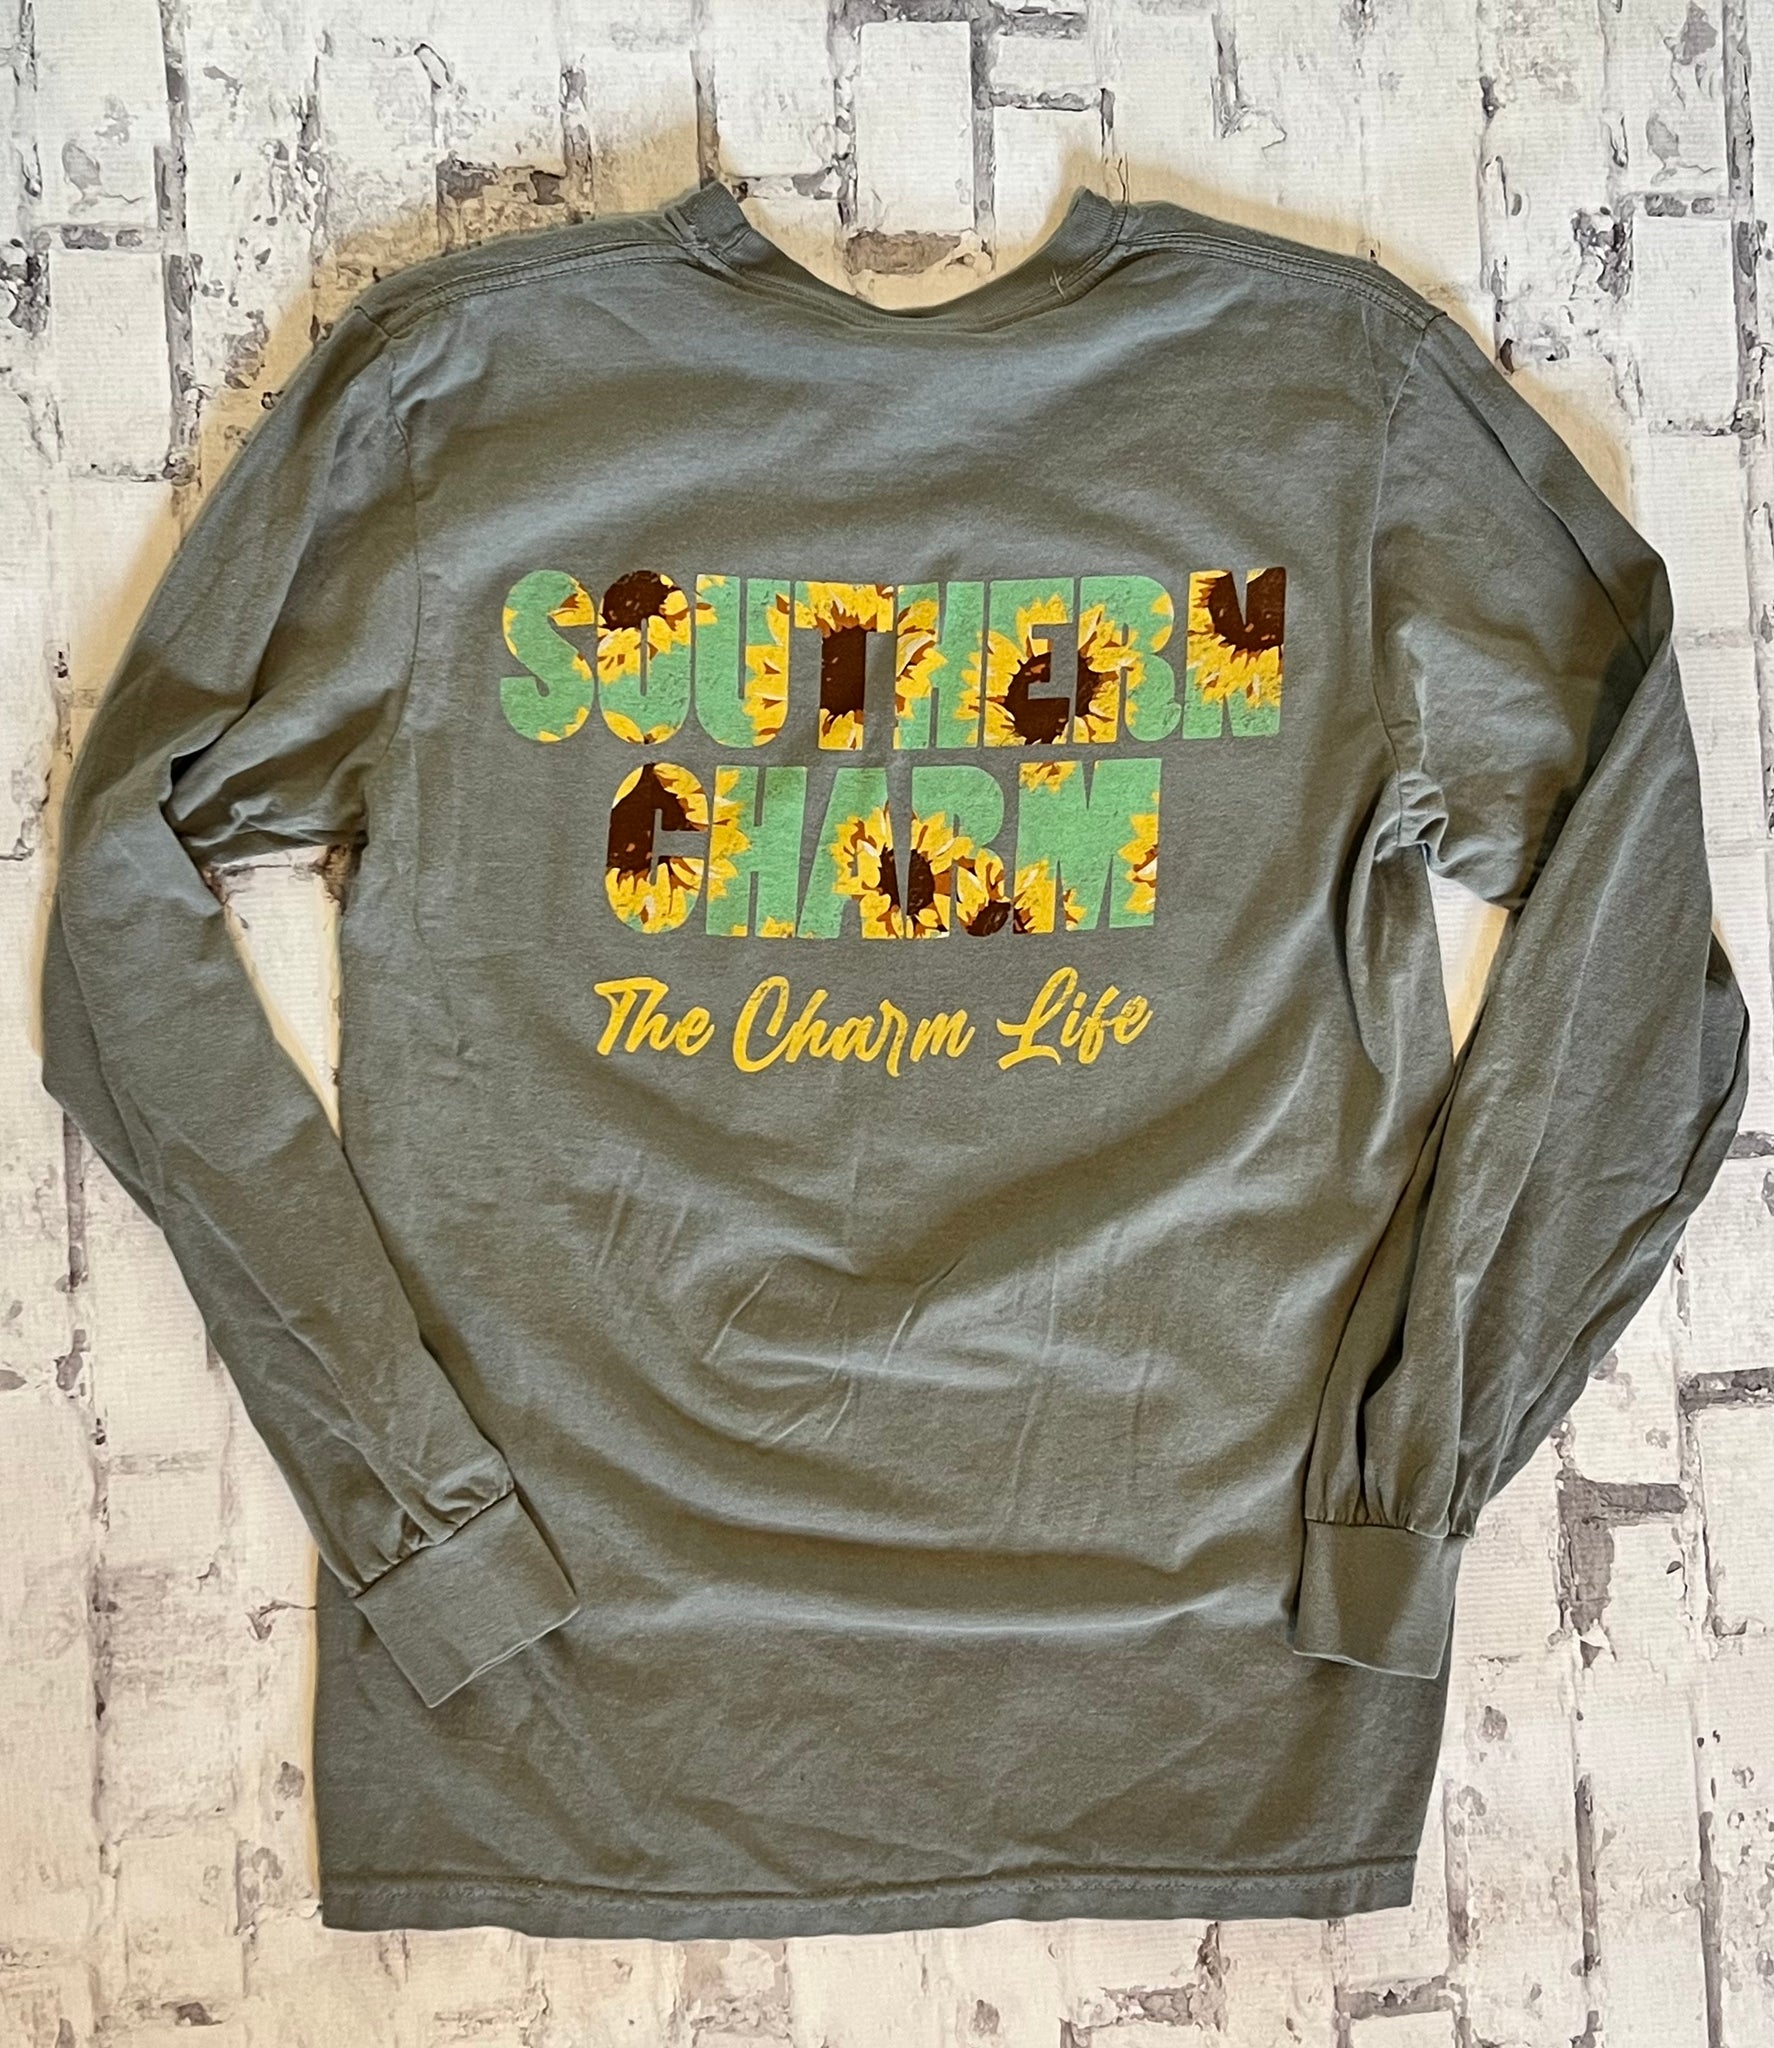 Southern Charm "Lettered Sunflowers" Long Sleeve T-shirt - Granite - Southern Charm "Shop The Charm"